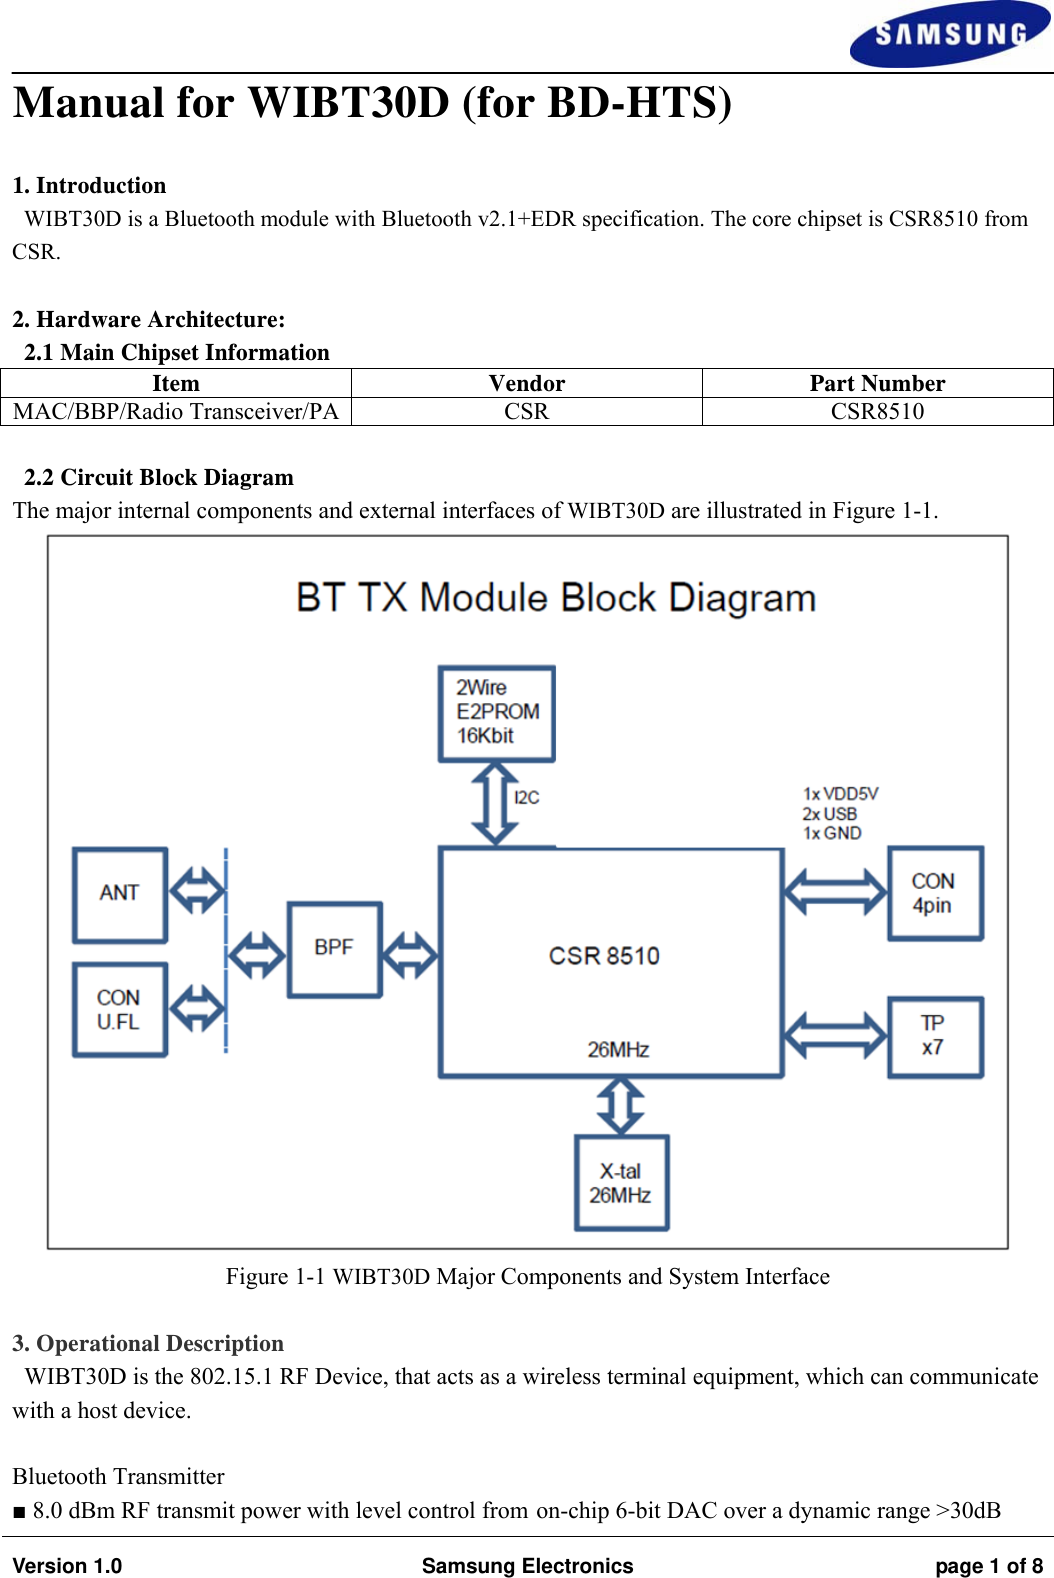                                                                                                                                                                    Version 1.0  Samsung Electronics  page 1 of 8  Manual for WIBT30D (for BD-HTS)  1. Introduction WIBT30D is a Bluetooth module with Bluetooth v2.1+EDR specification. The core chipset is CSR8510 from CSR.   2. Hardware Architecture: 2.1 Main Chipset Information Item Vendor Part Number MAC/BBP/Radio Transceiver/PA CSR CSR8510  2.2 Circuit Block Diagram The major internal components and external interfaces of WIBT30D are illustrated in Figure 1-1.  Figure 1-1 WIBT30D Major Components and System Interface  3. Operational Description WIBT30D is the 802.15.1 RF Device, that acts as a wireless terminal equipment, which can communicate with a host device.  Bluetooth Transmitter ■ 8.0 dBm RF transmit power with level control from on-chip 6-bit DAC over a dynamic range &gt;30dB 